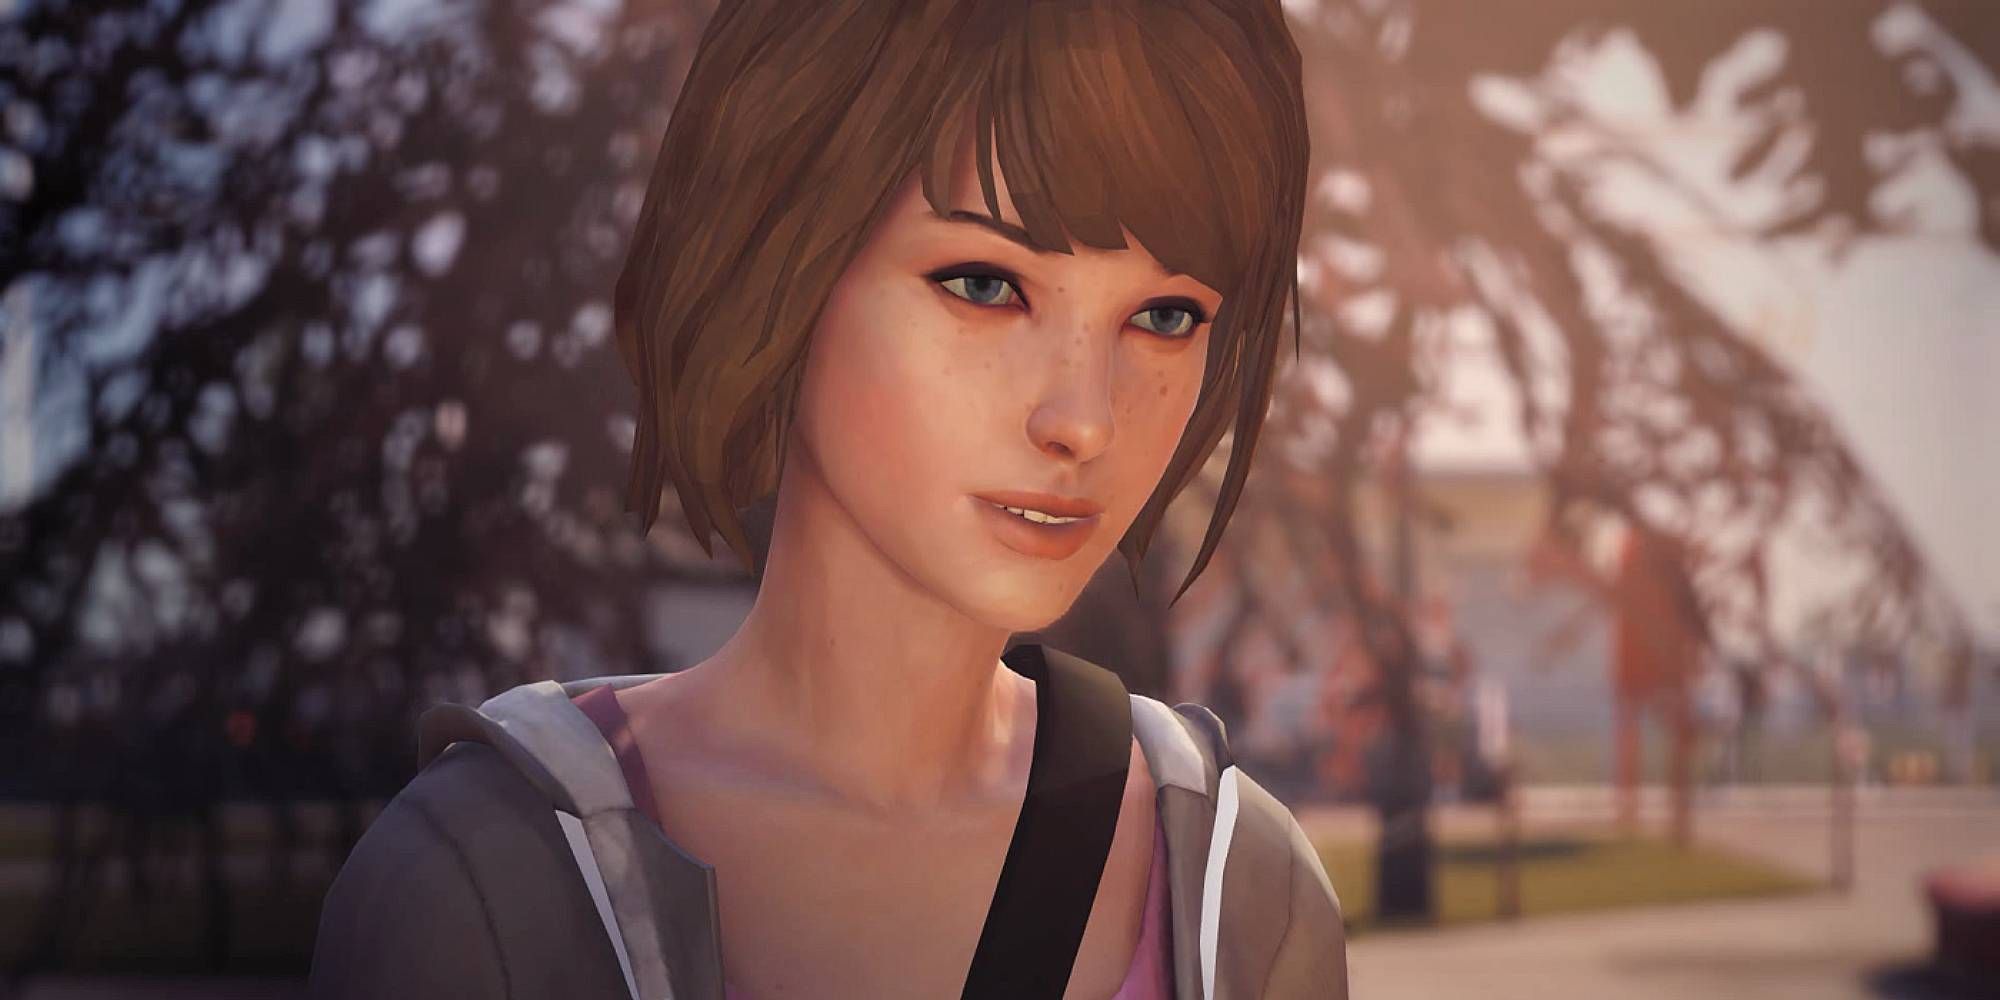 Max smiles slightly as she stands in a sunny environment in Life Is Strange.